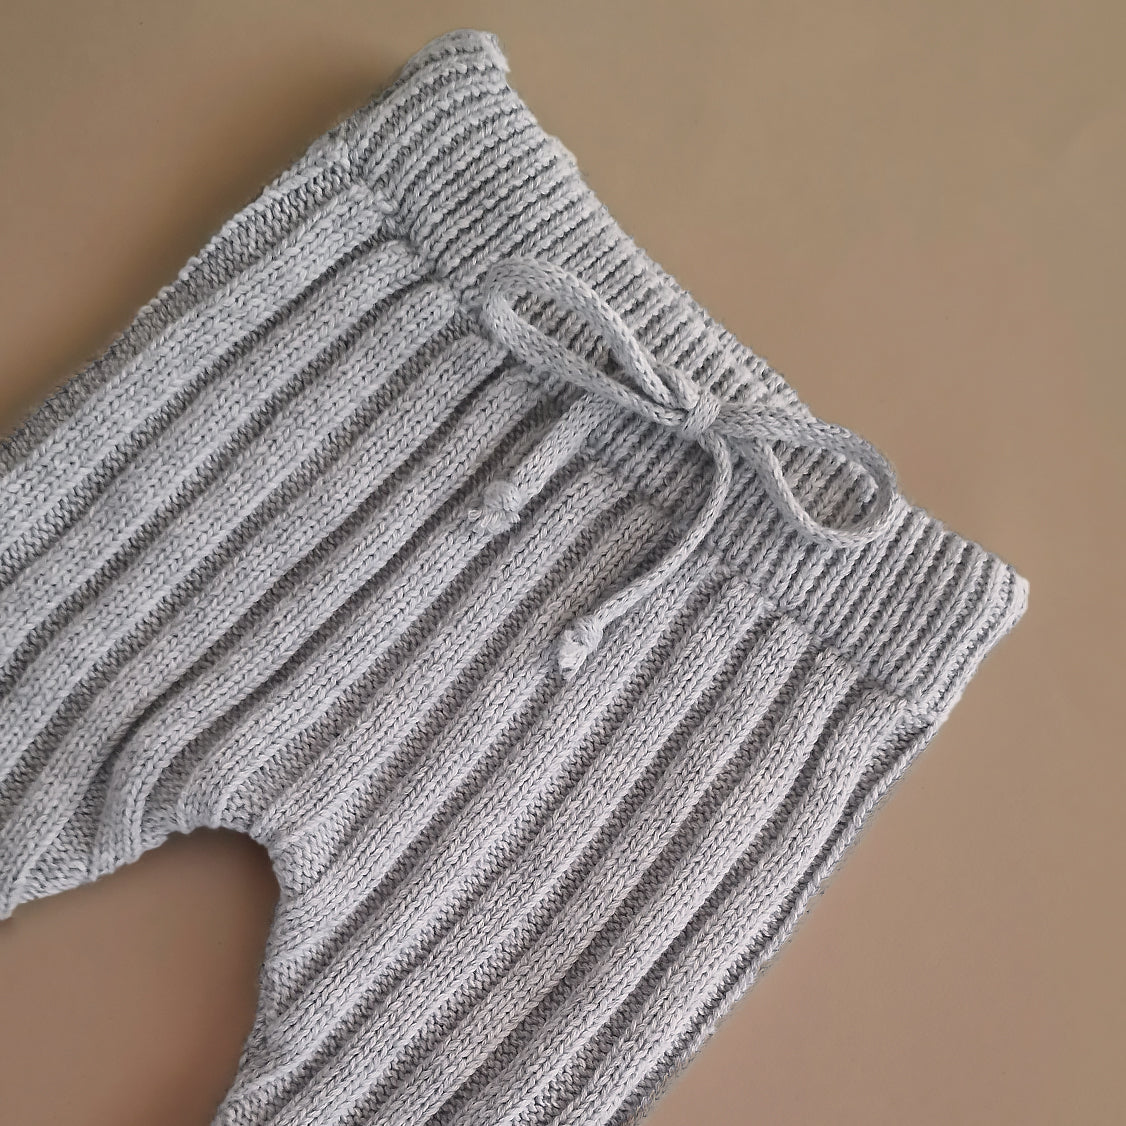 Knitted Footed Leggings - Cotton - Grey - Petit Filippe